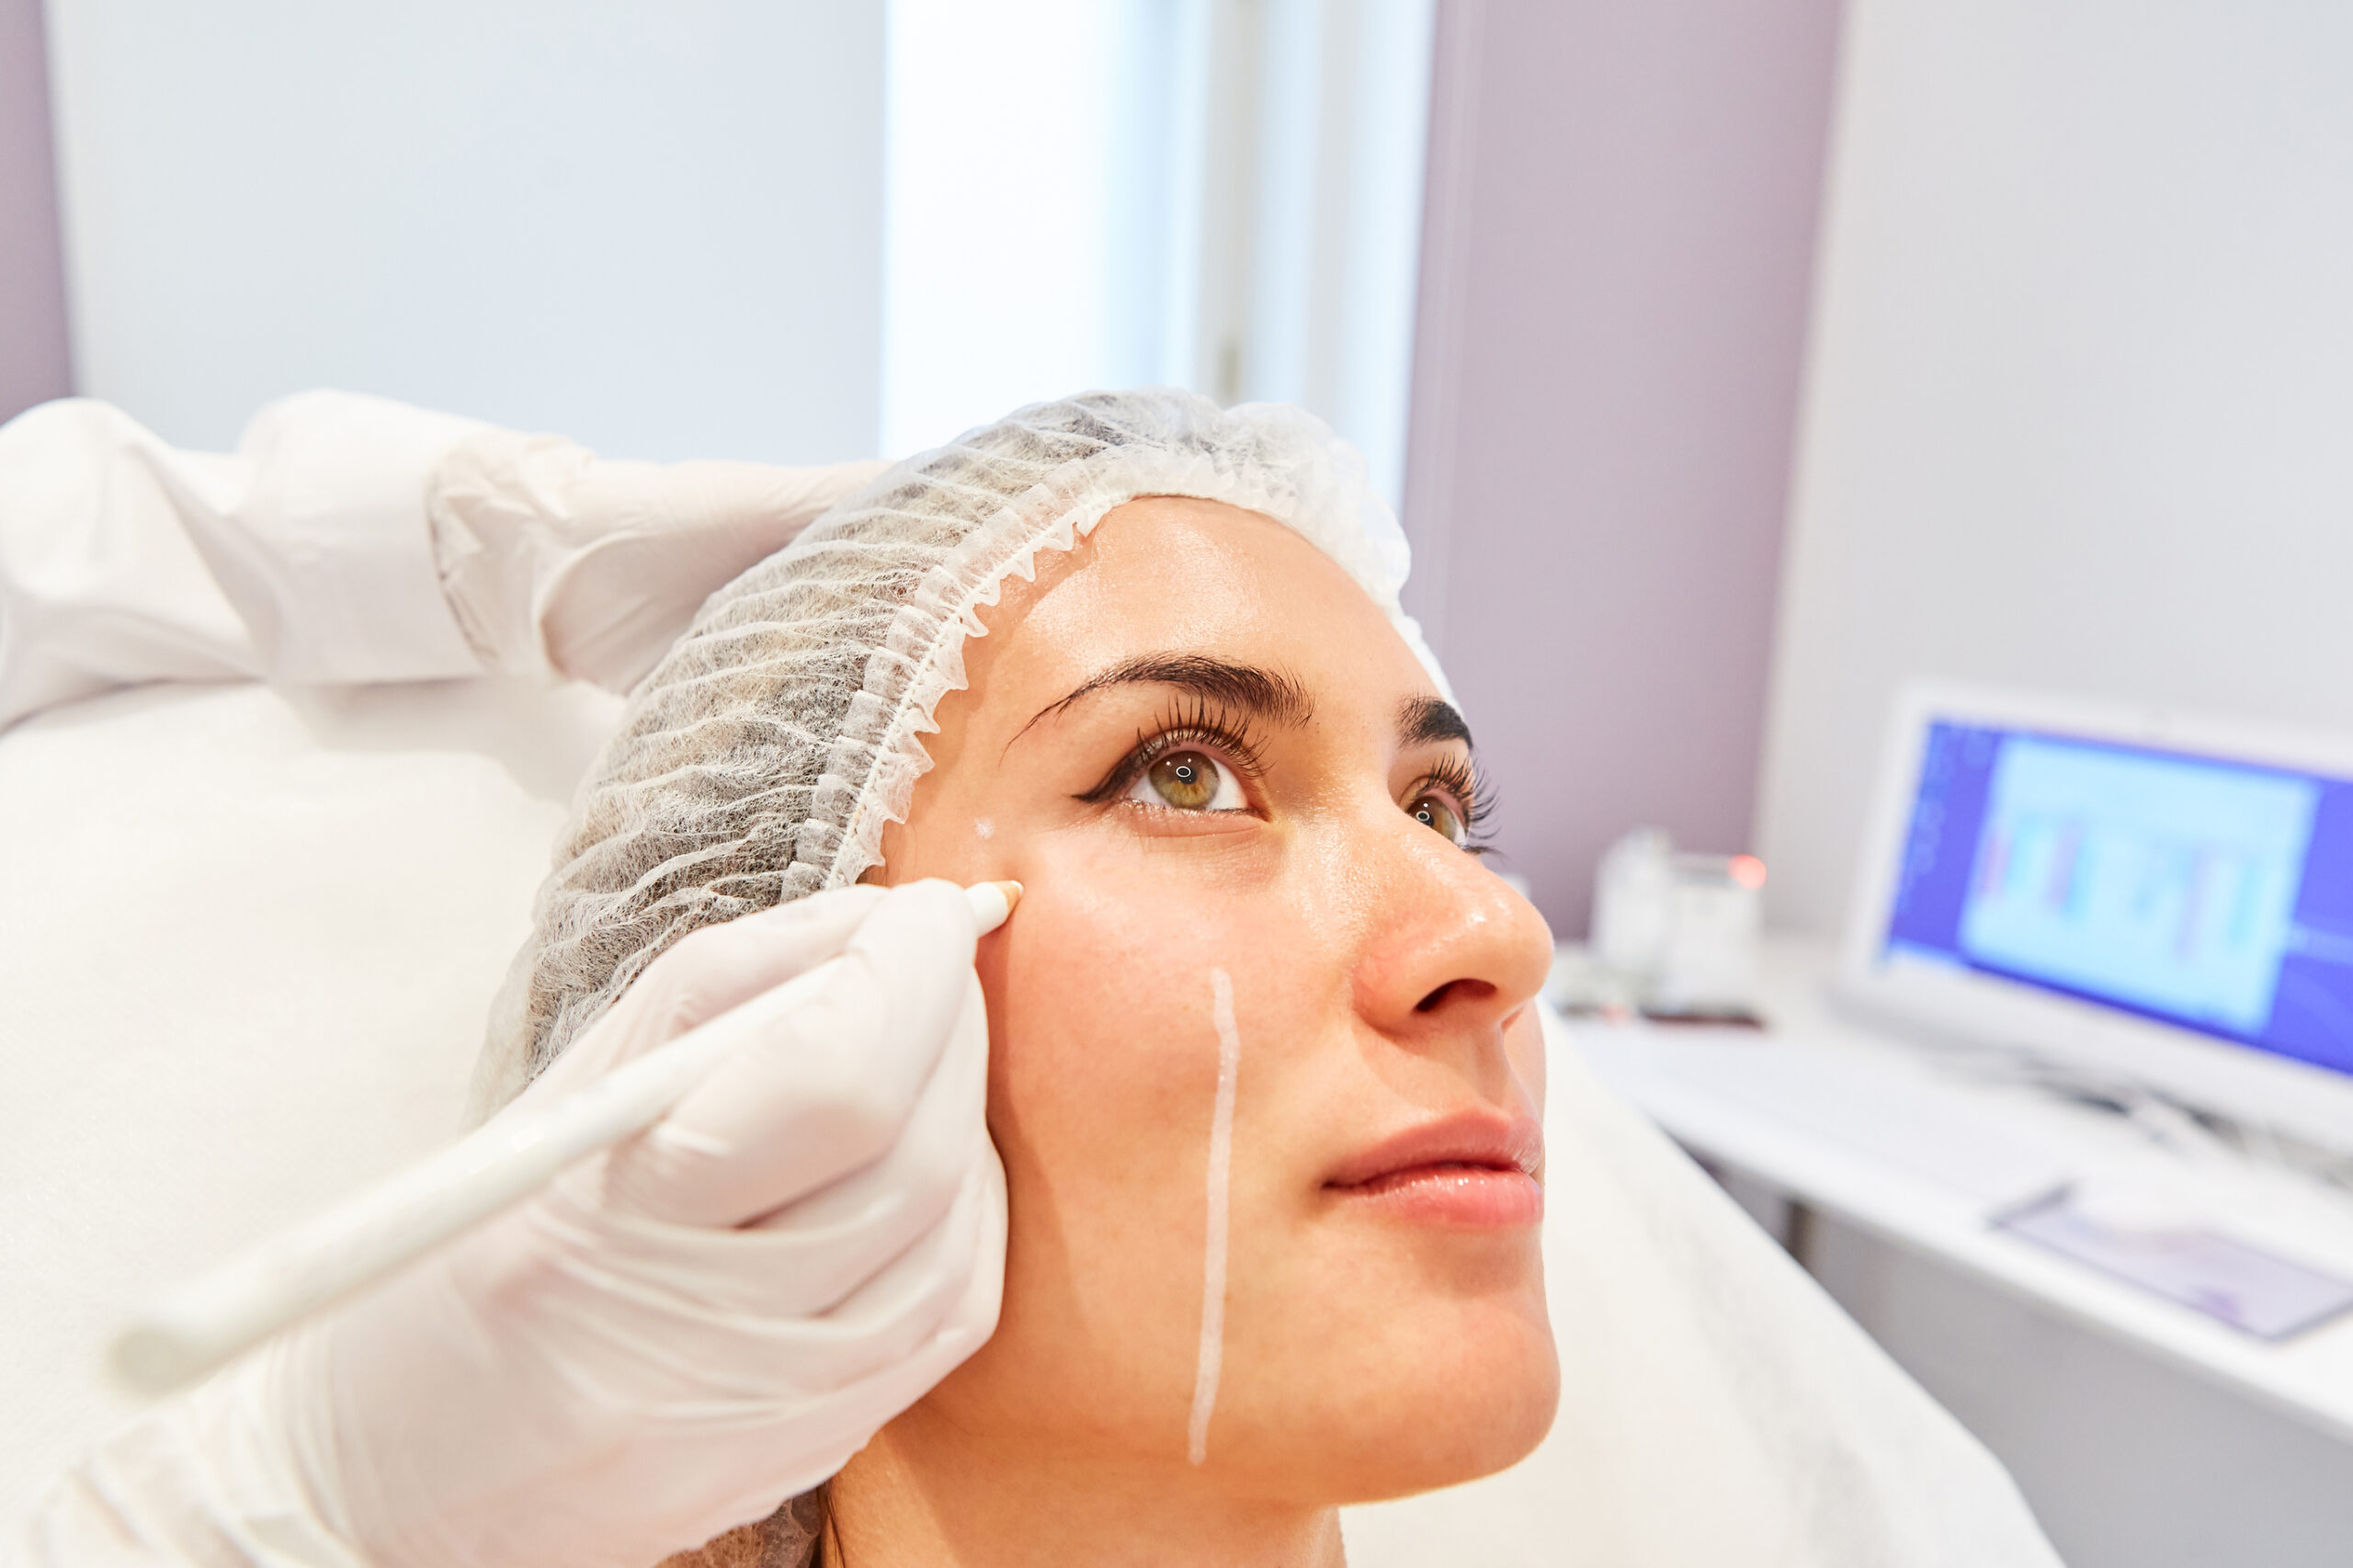 Achieving Your Aesthetic Goals with Hyaluronic Acid Fillers